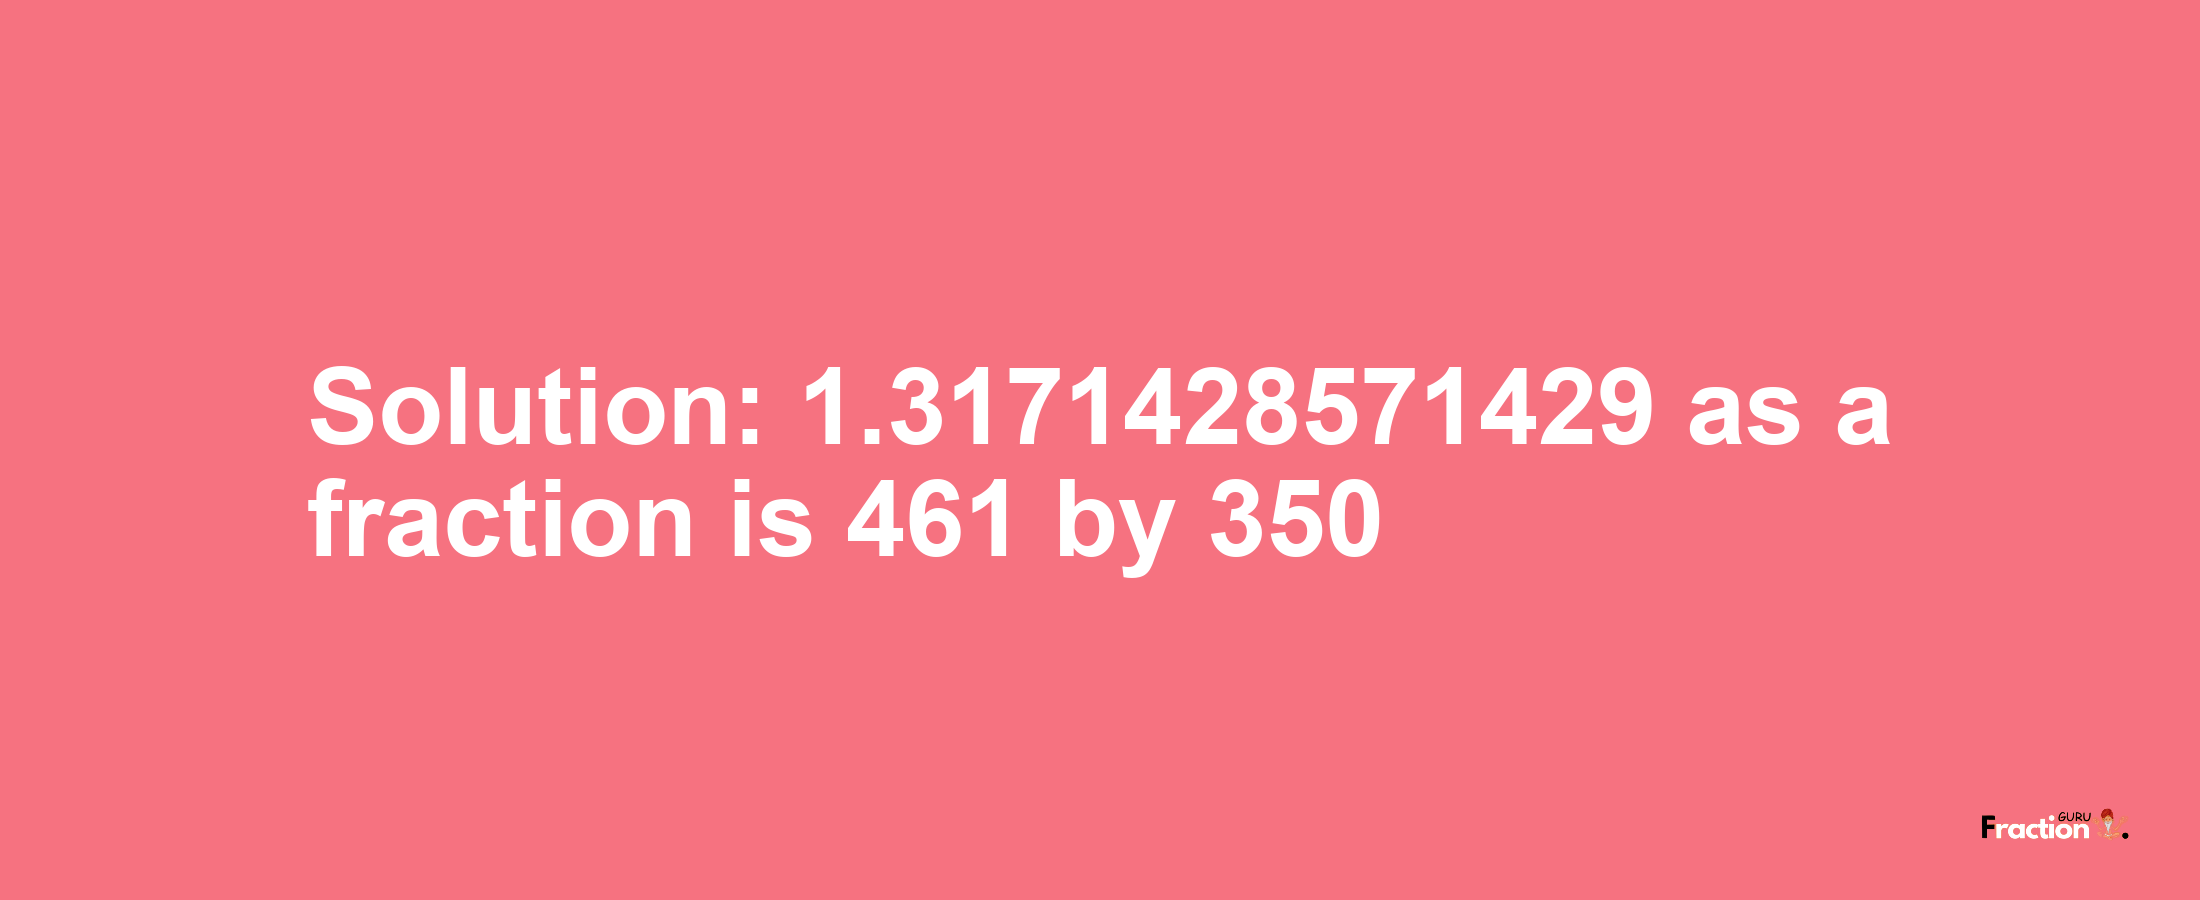 Solution:1.3171428571429 as a fraction is 461/350